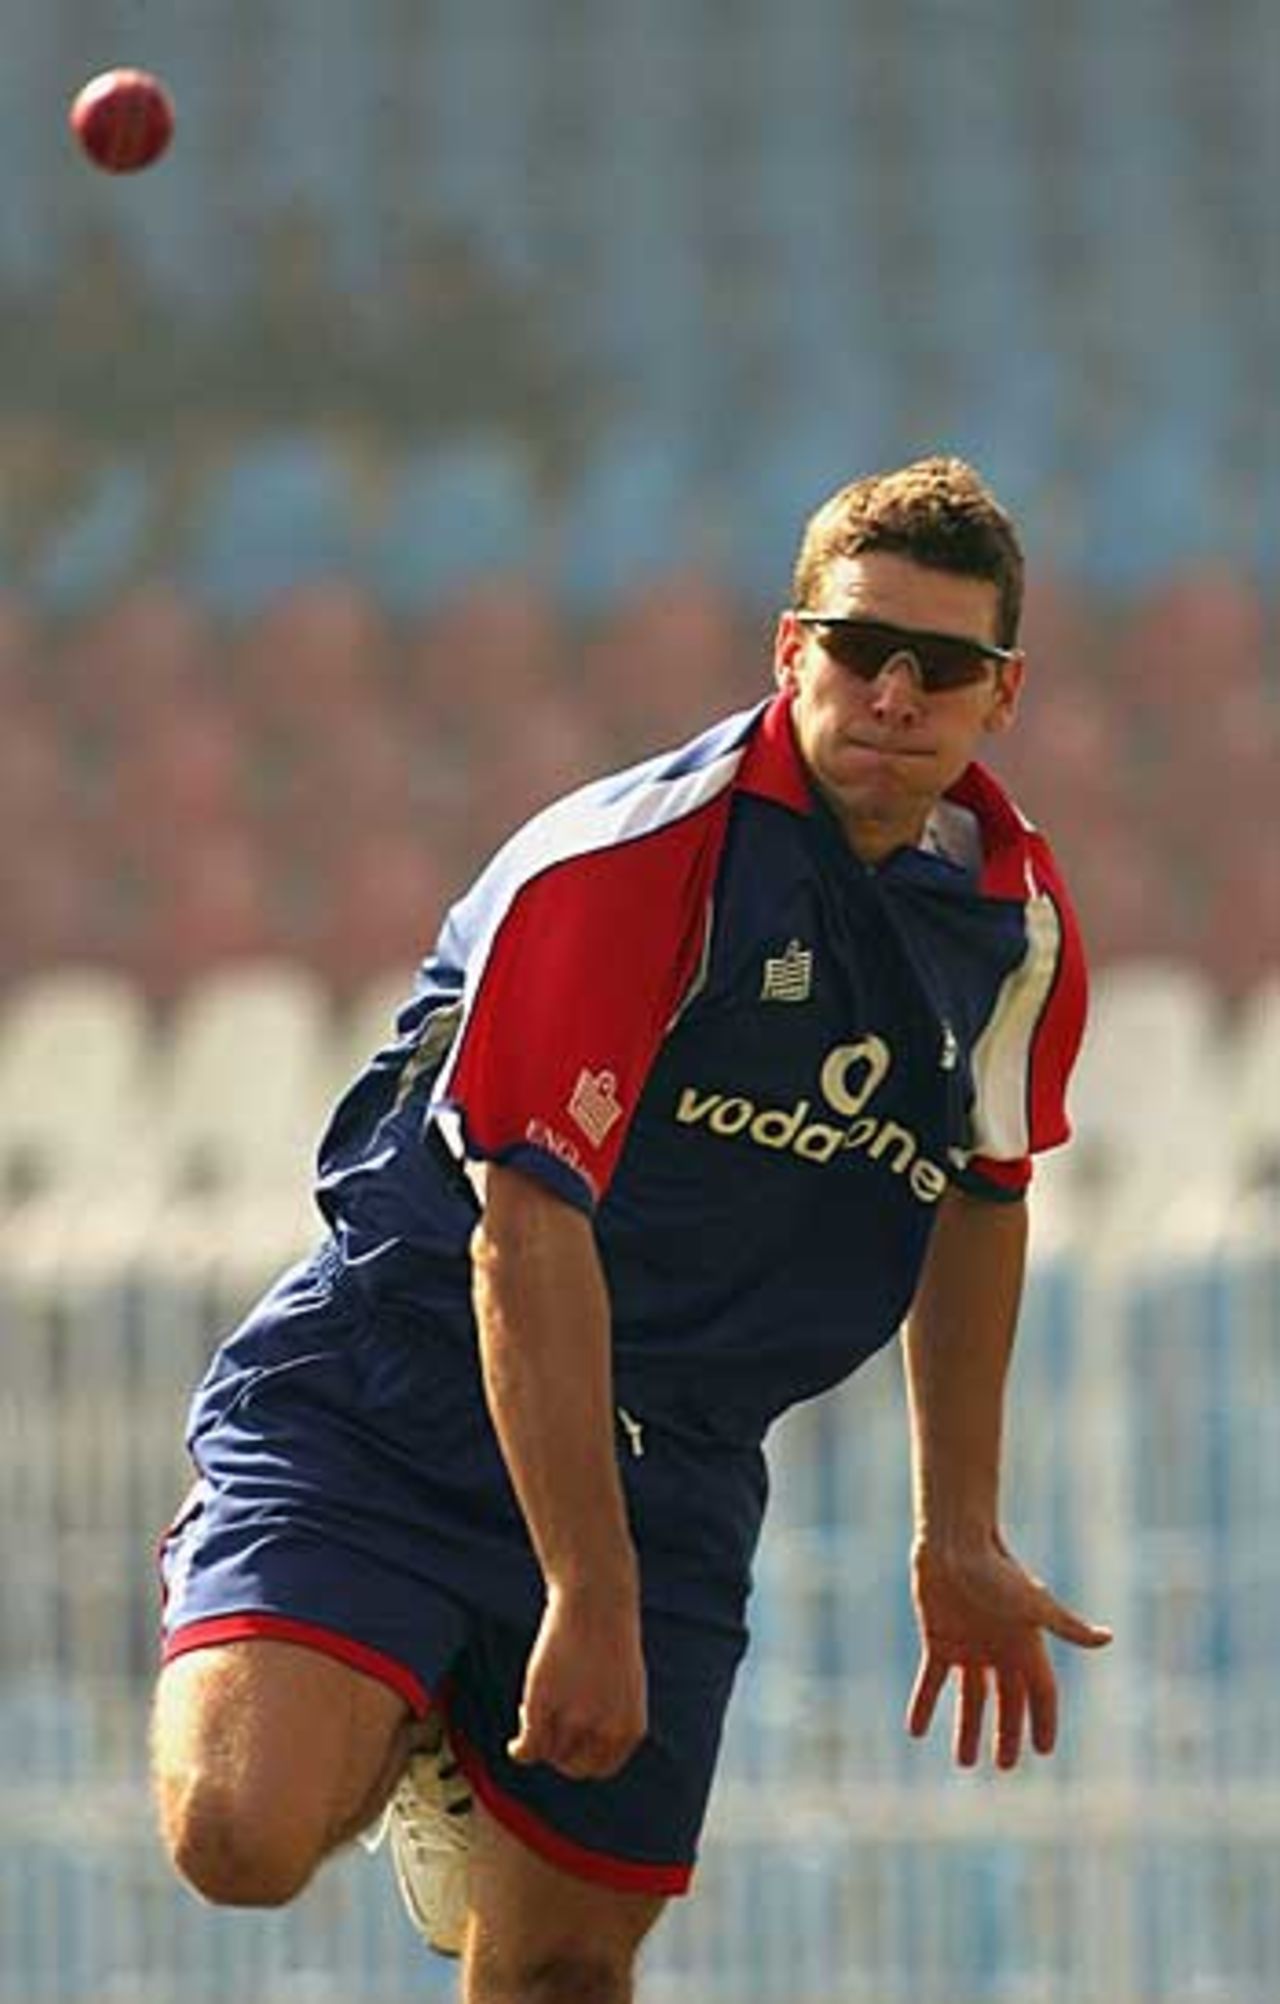 Alex Loudon bowls during a training session, Islamabad, October 27, 2005